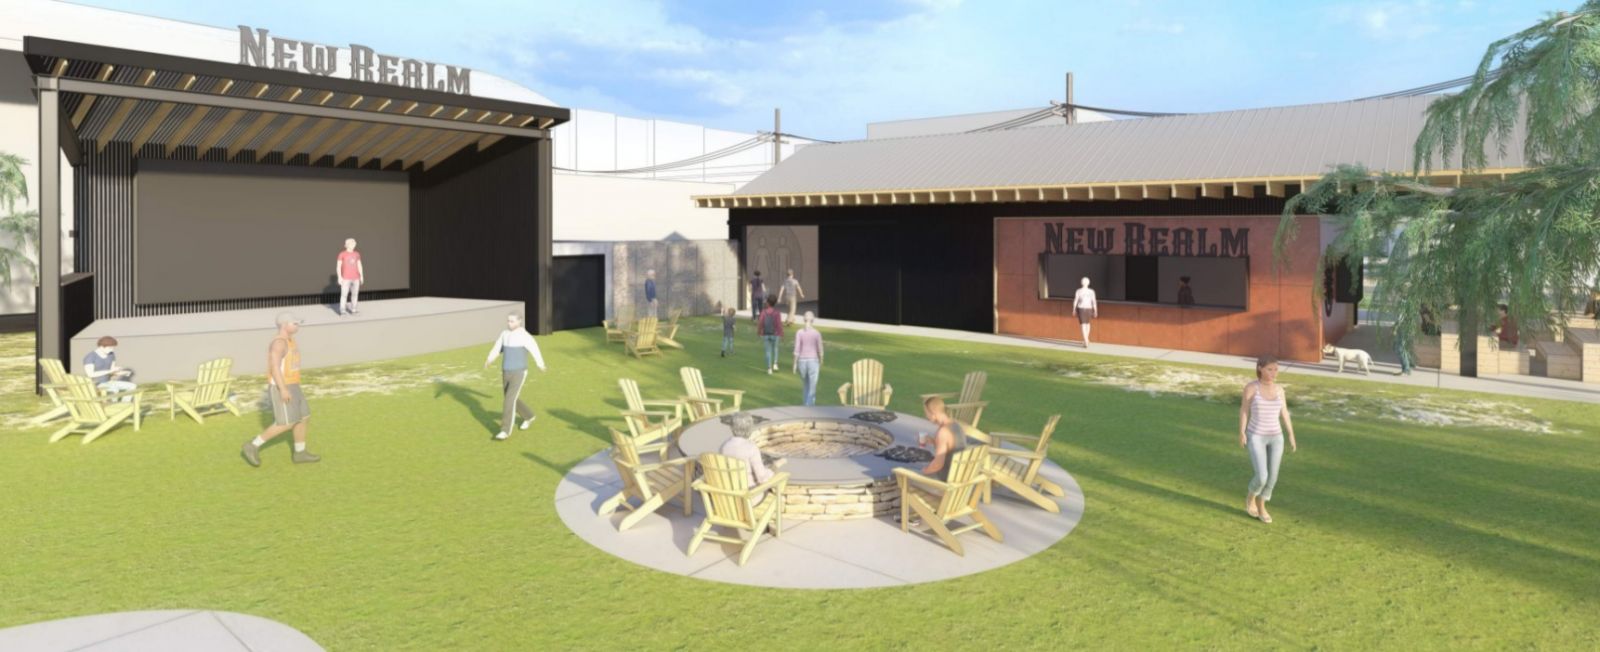 The New Realm Brewing Co. Greenville facility will be the brewery's fourth location. (Rendering/Provided)